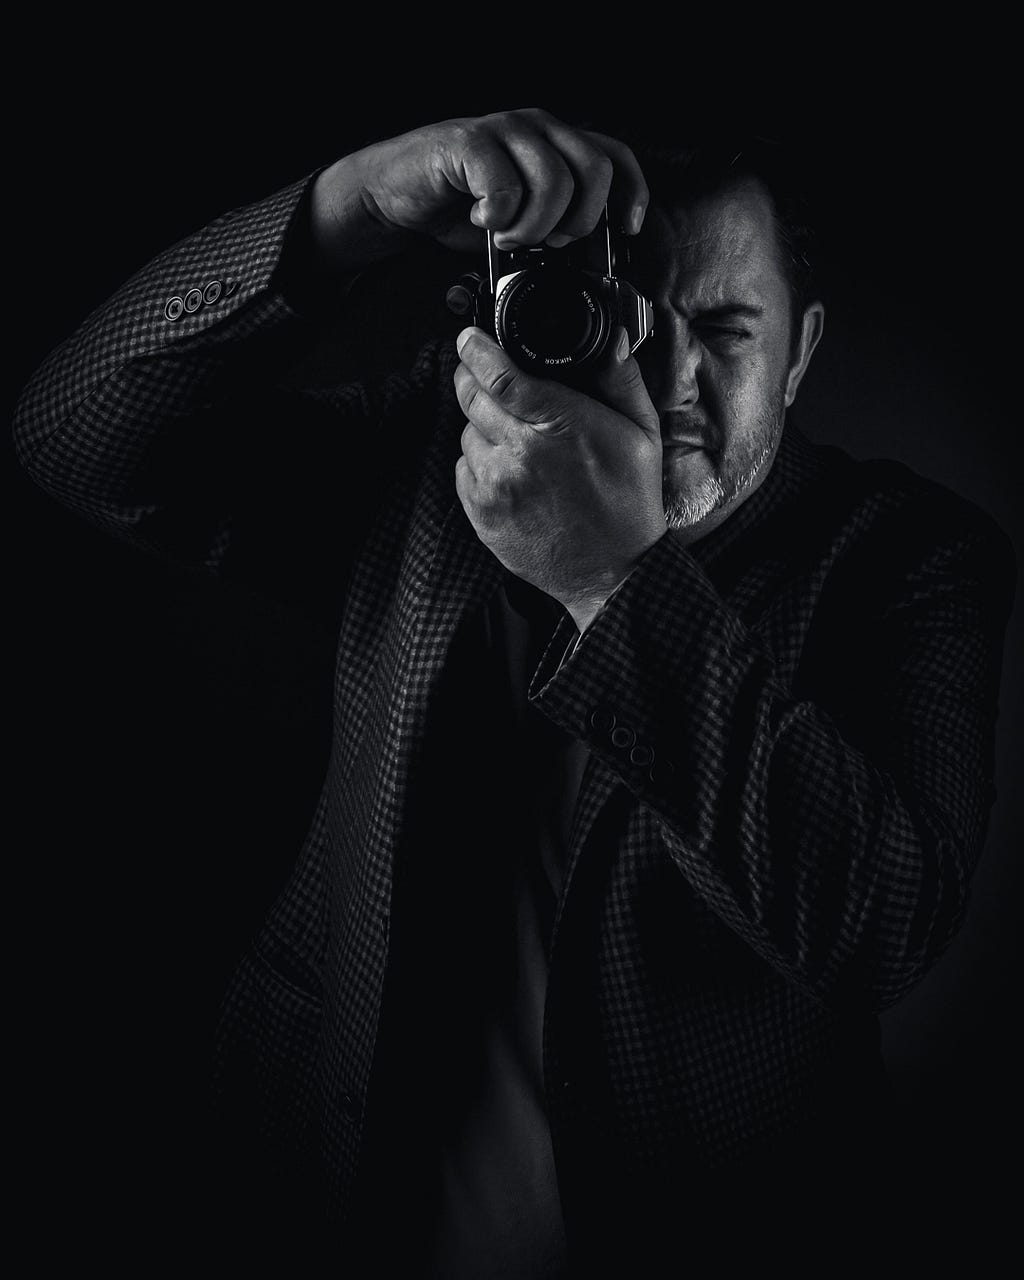 Robert Schall holding a 35mm film camera from Nikon shot in high contrast black and white